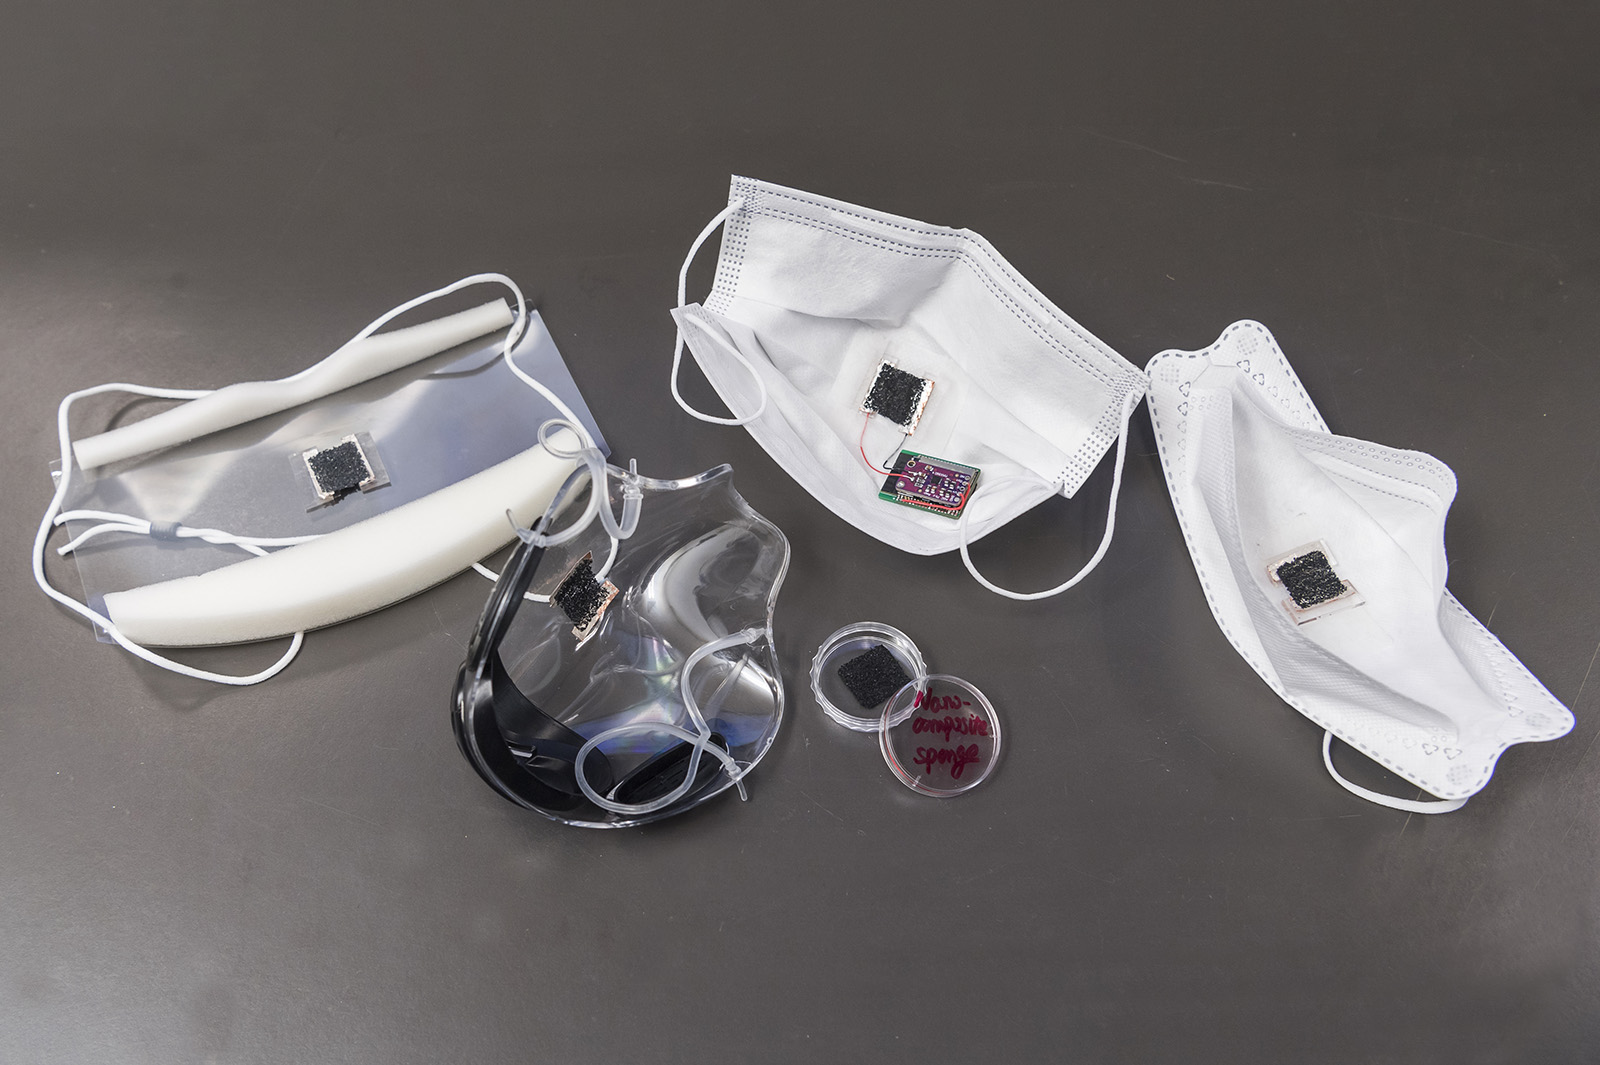 The flexible sensor can be used to detect human respiratory activities by integrating with commercial masks.